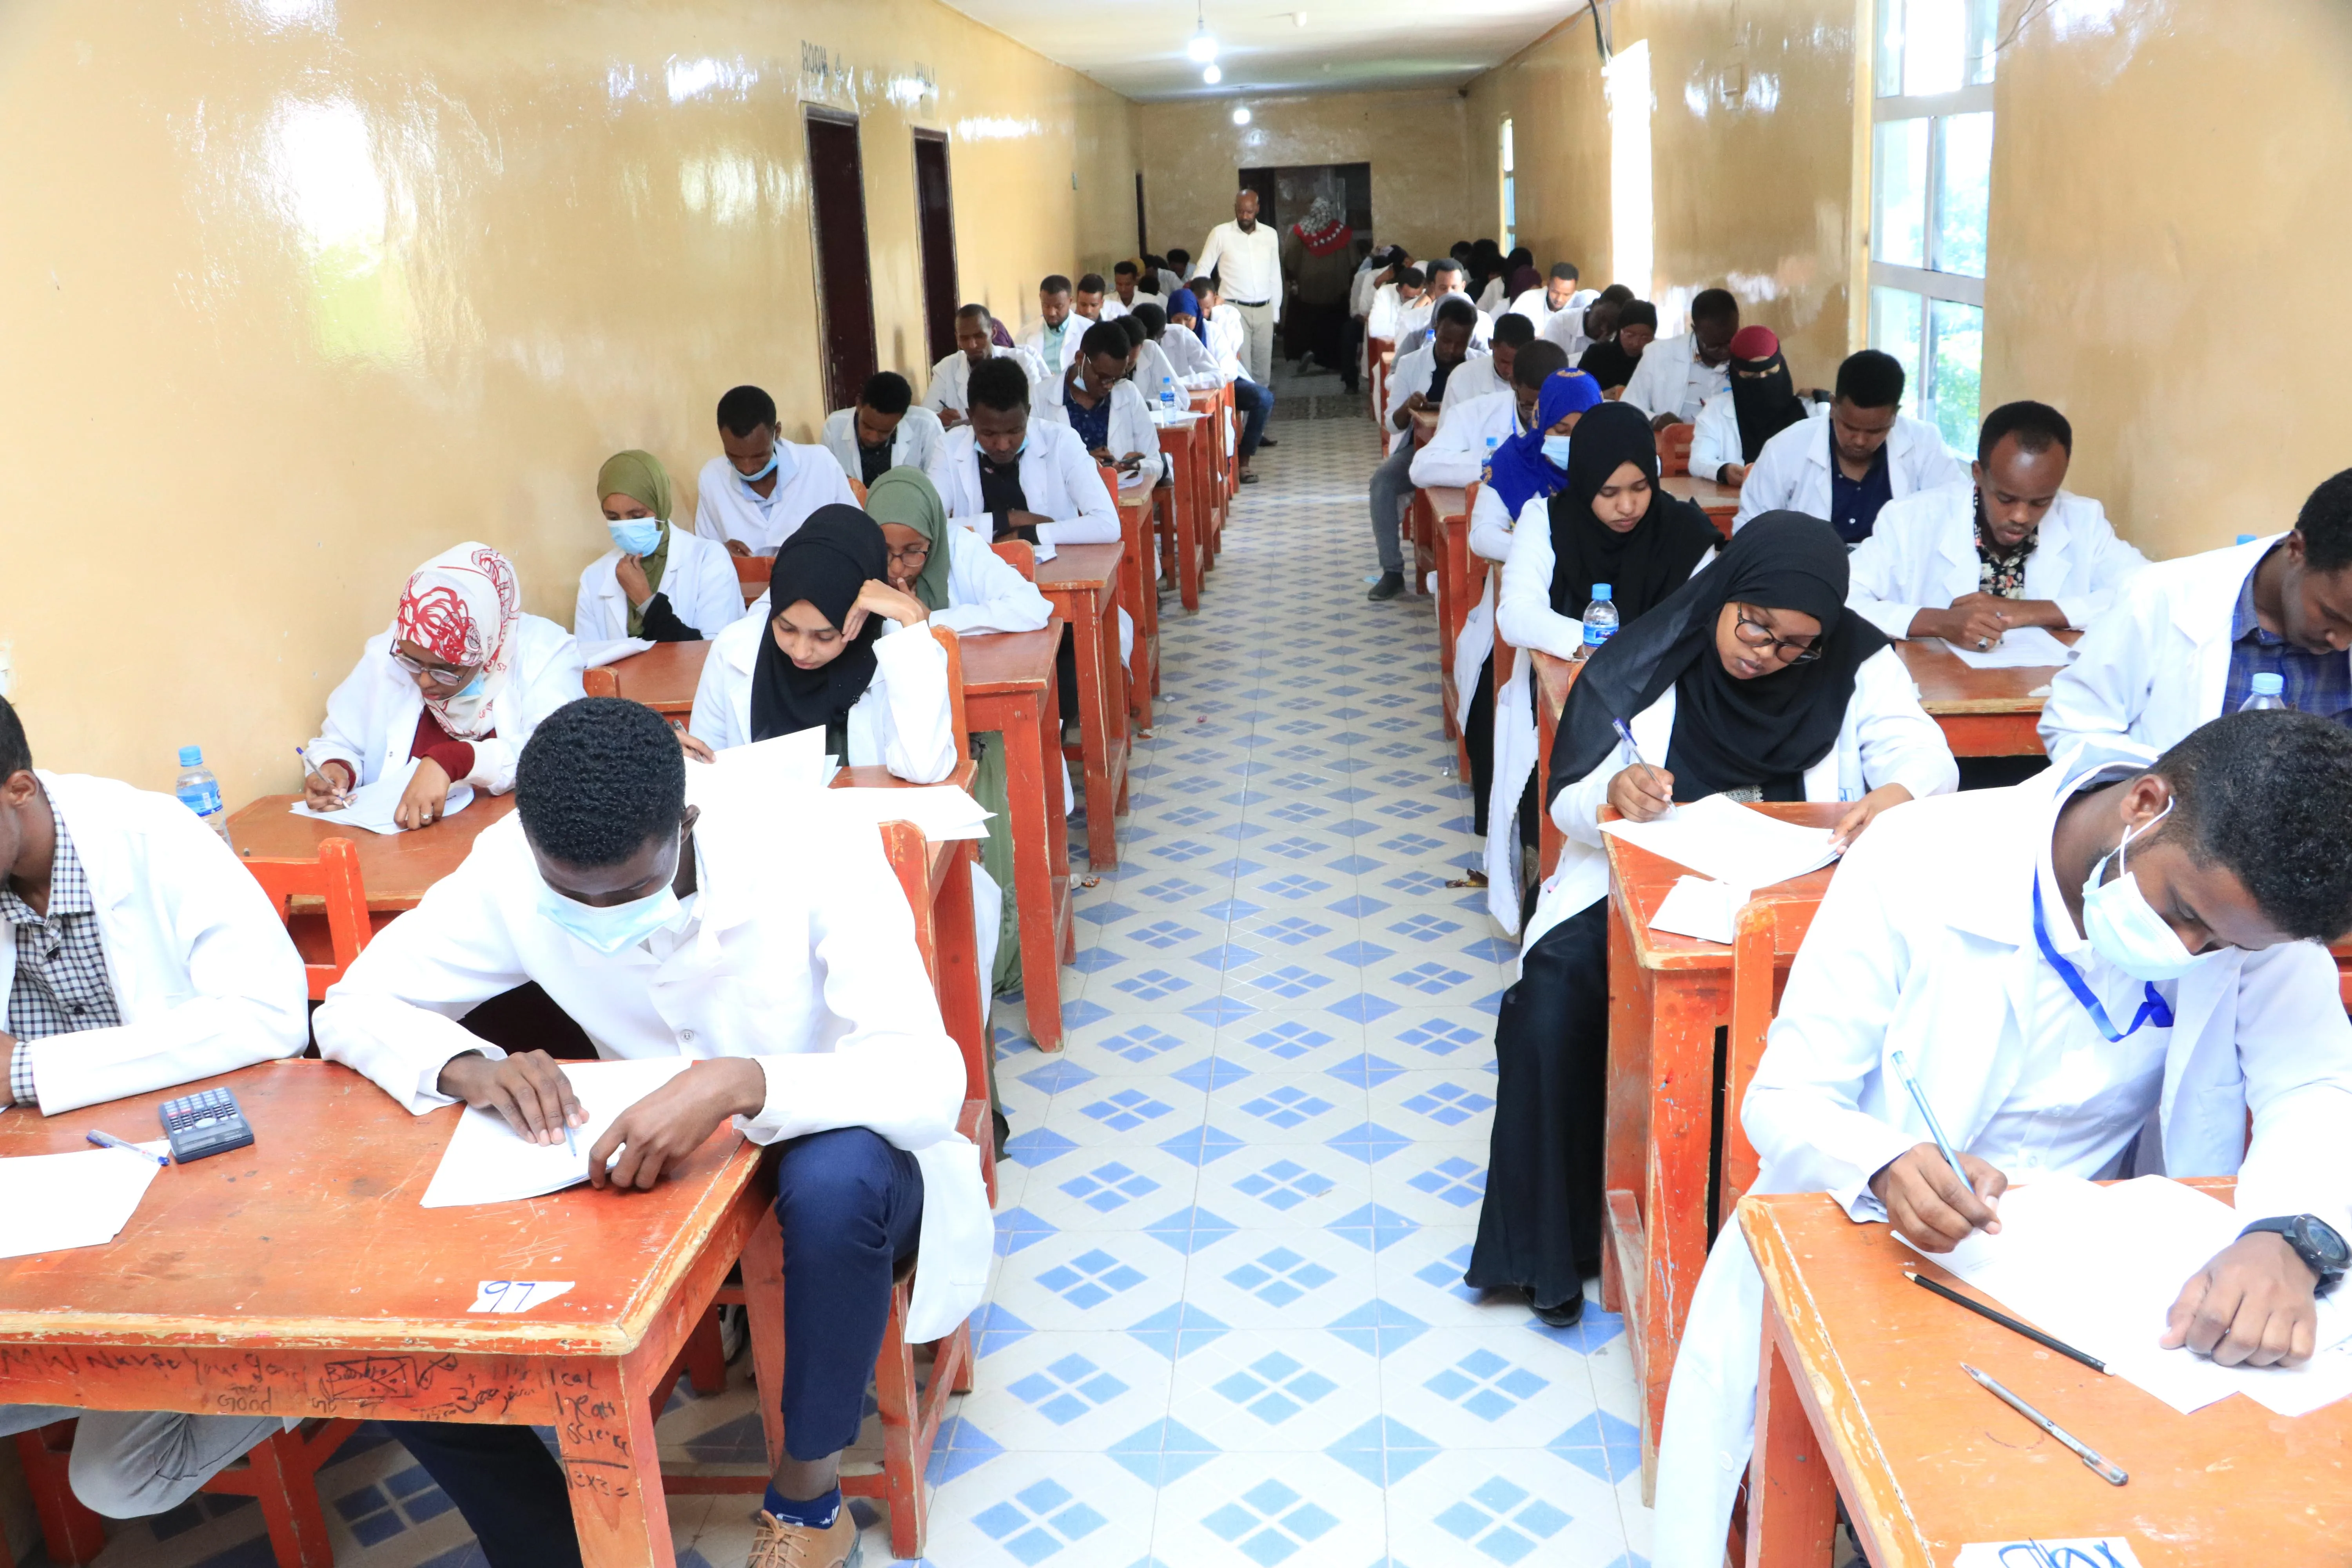 Medical students sitting an exam in Somaliland